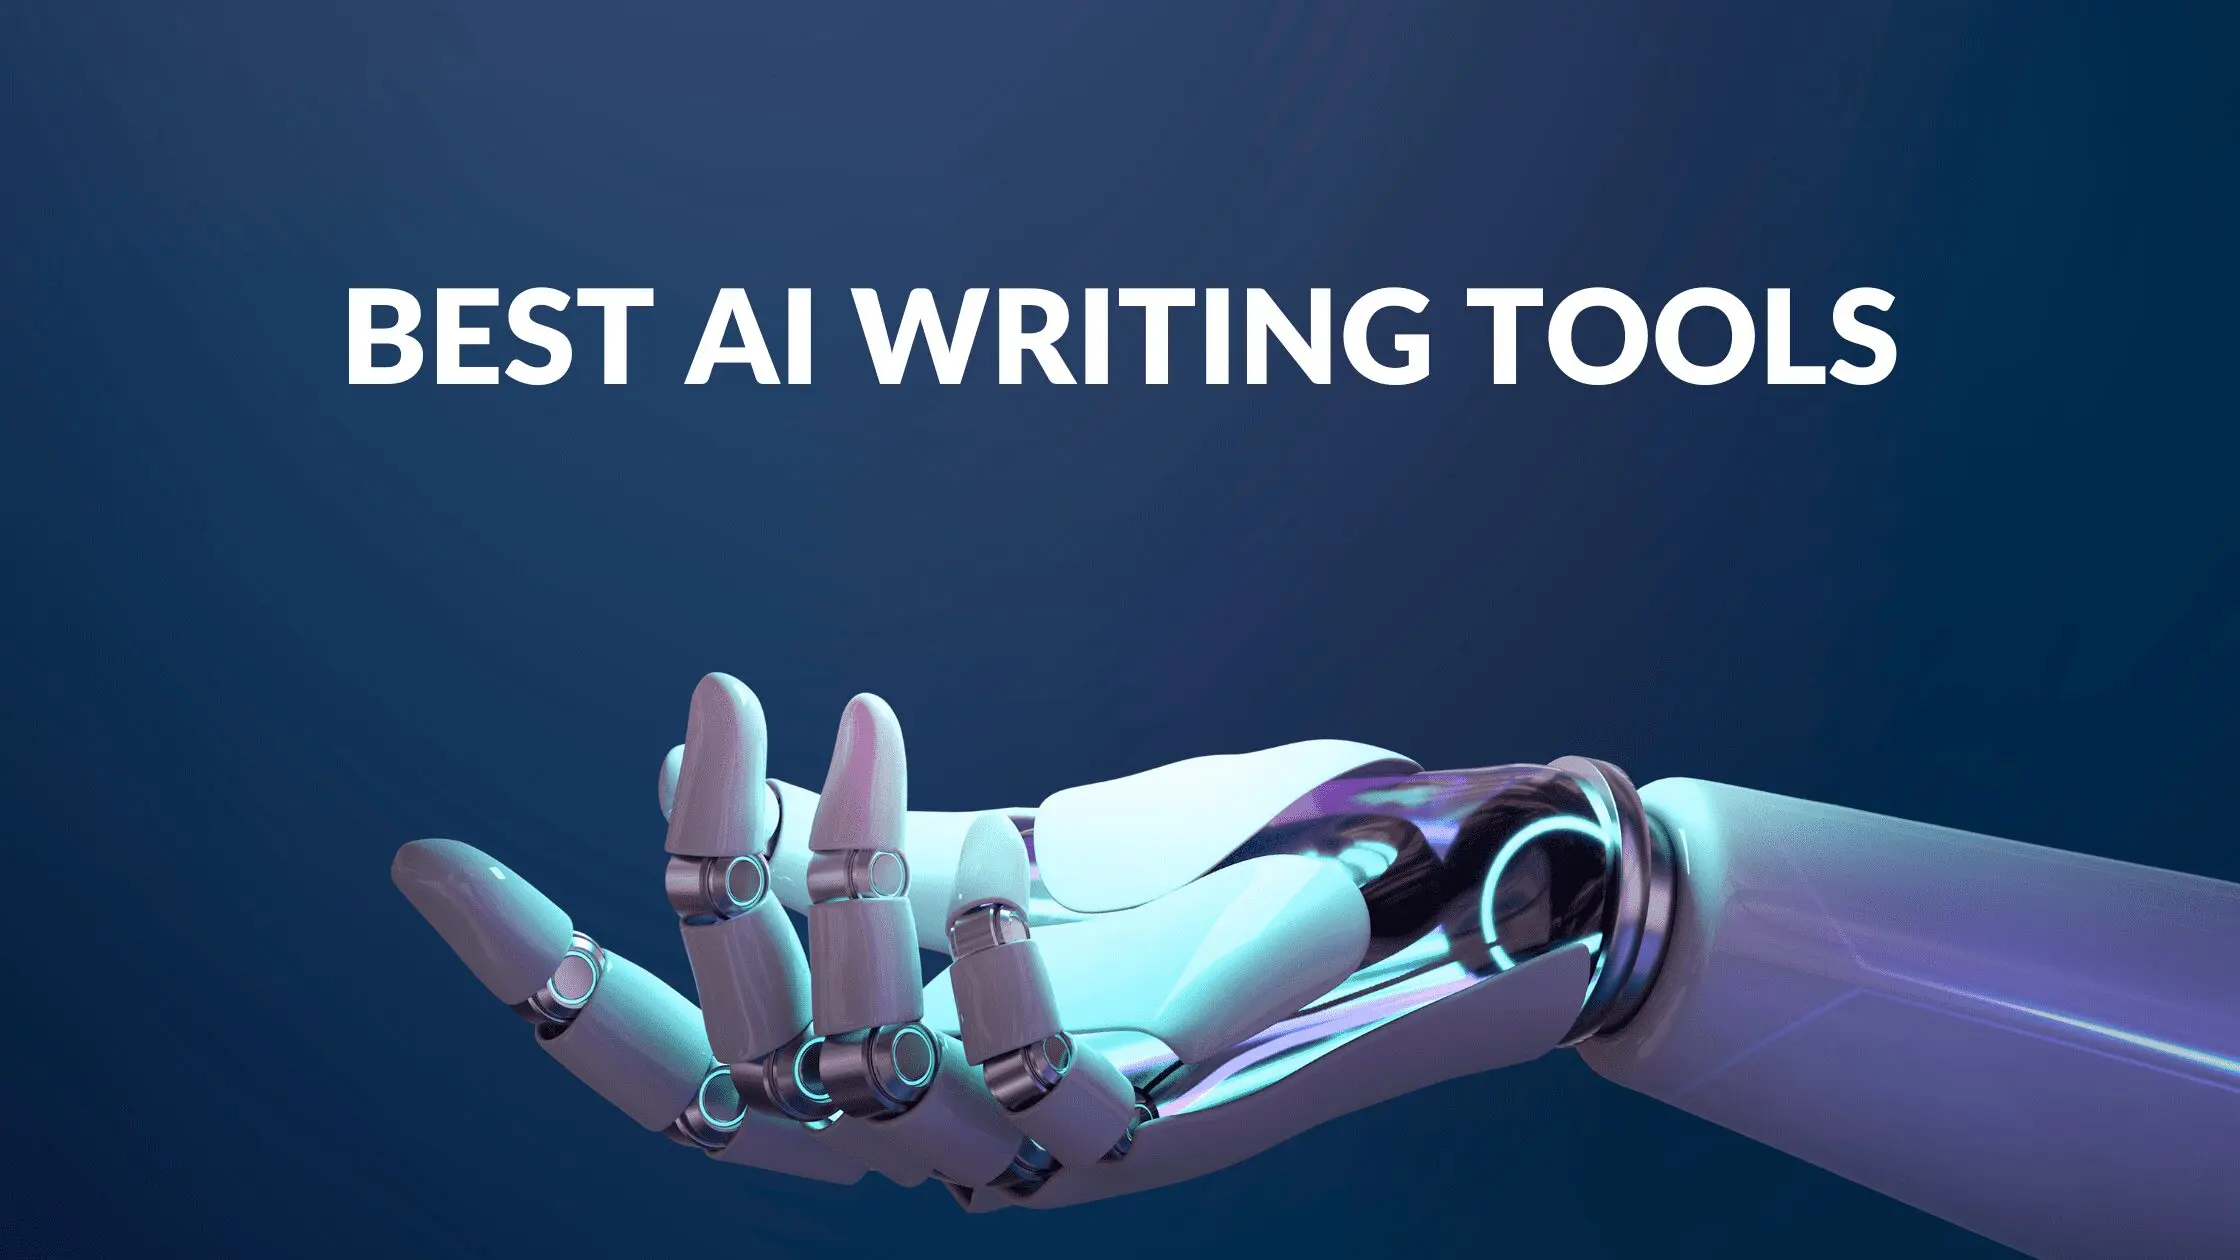 Best AI Writing Tools - About